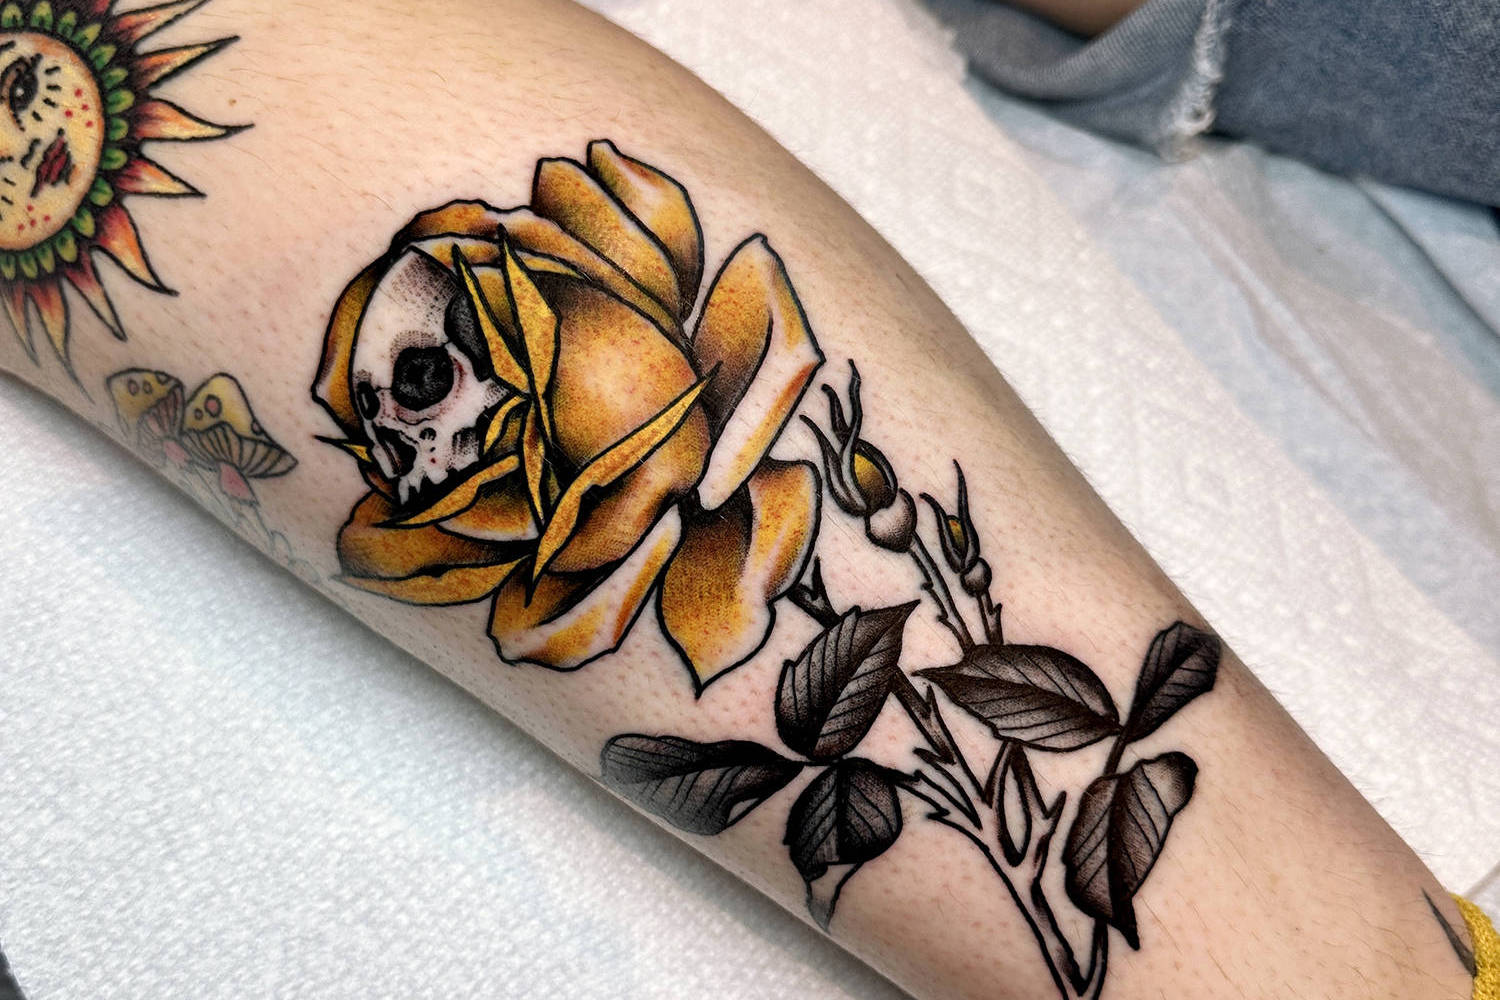 rose and skull tattoo on leg by mark clifford